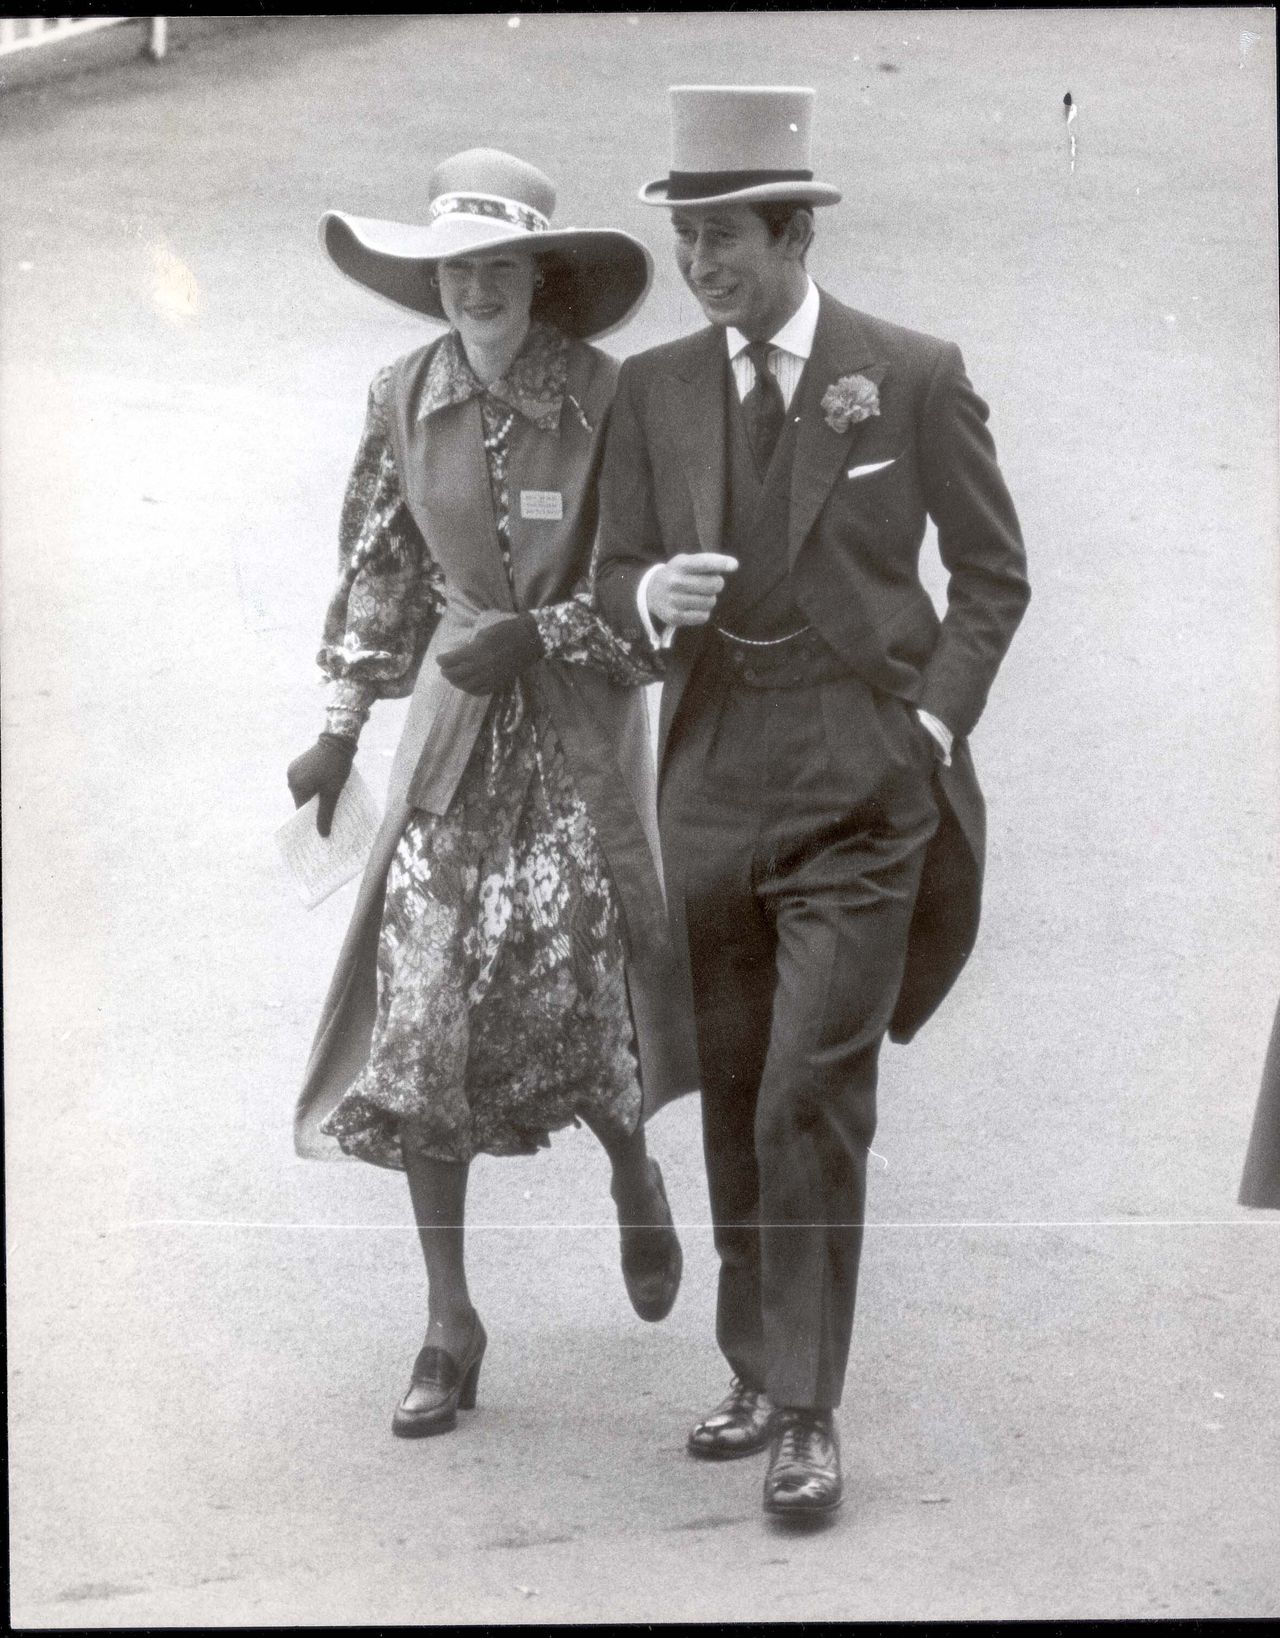 Prince Charles with Diana's older sister, Lady Sarah Spencer at Royal Ascot in 1977 